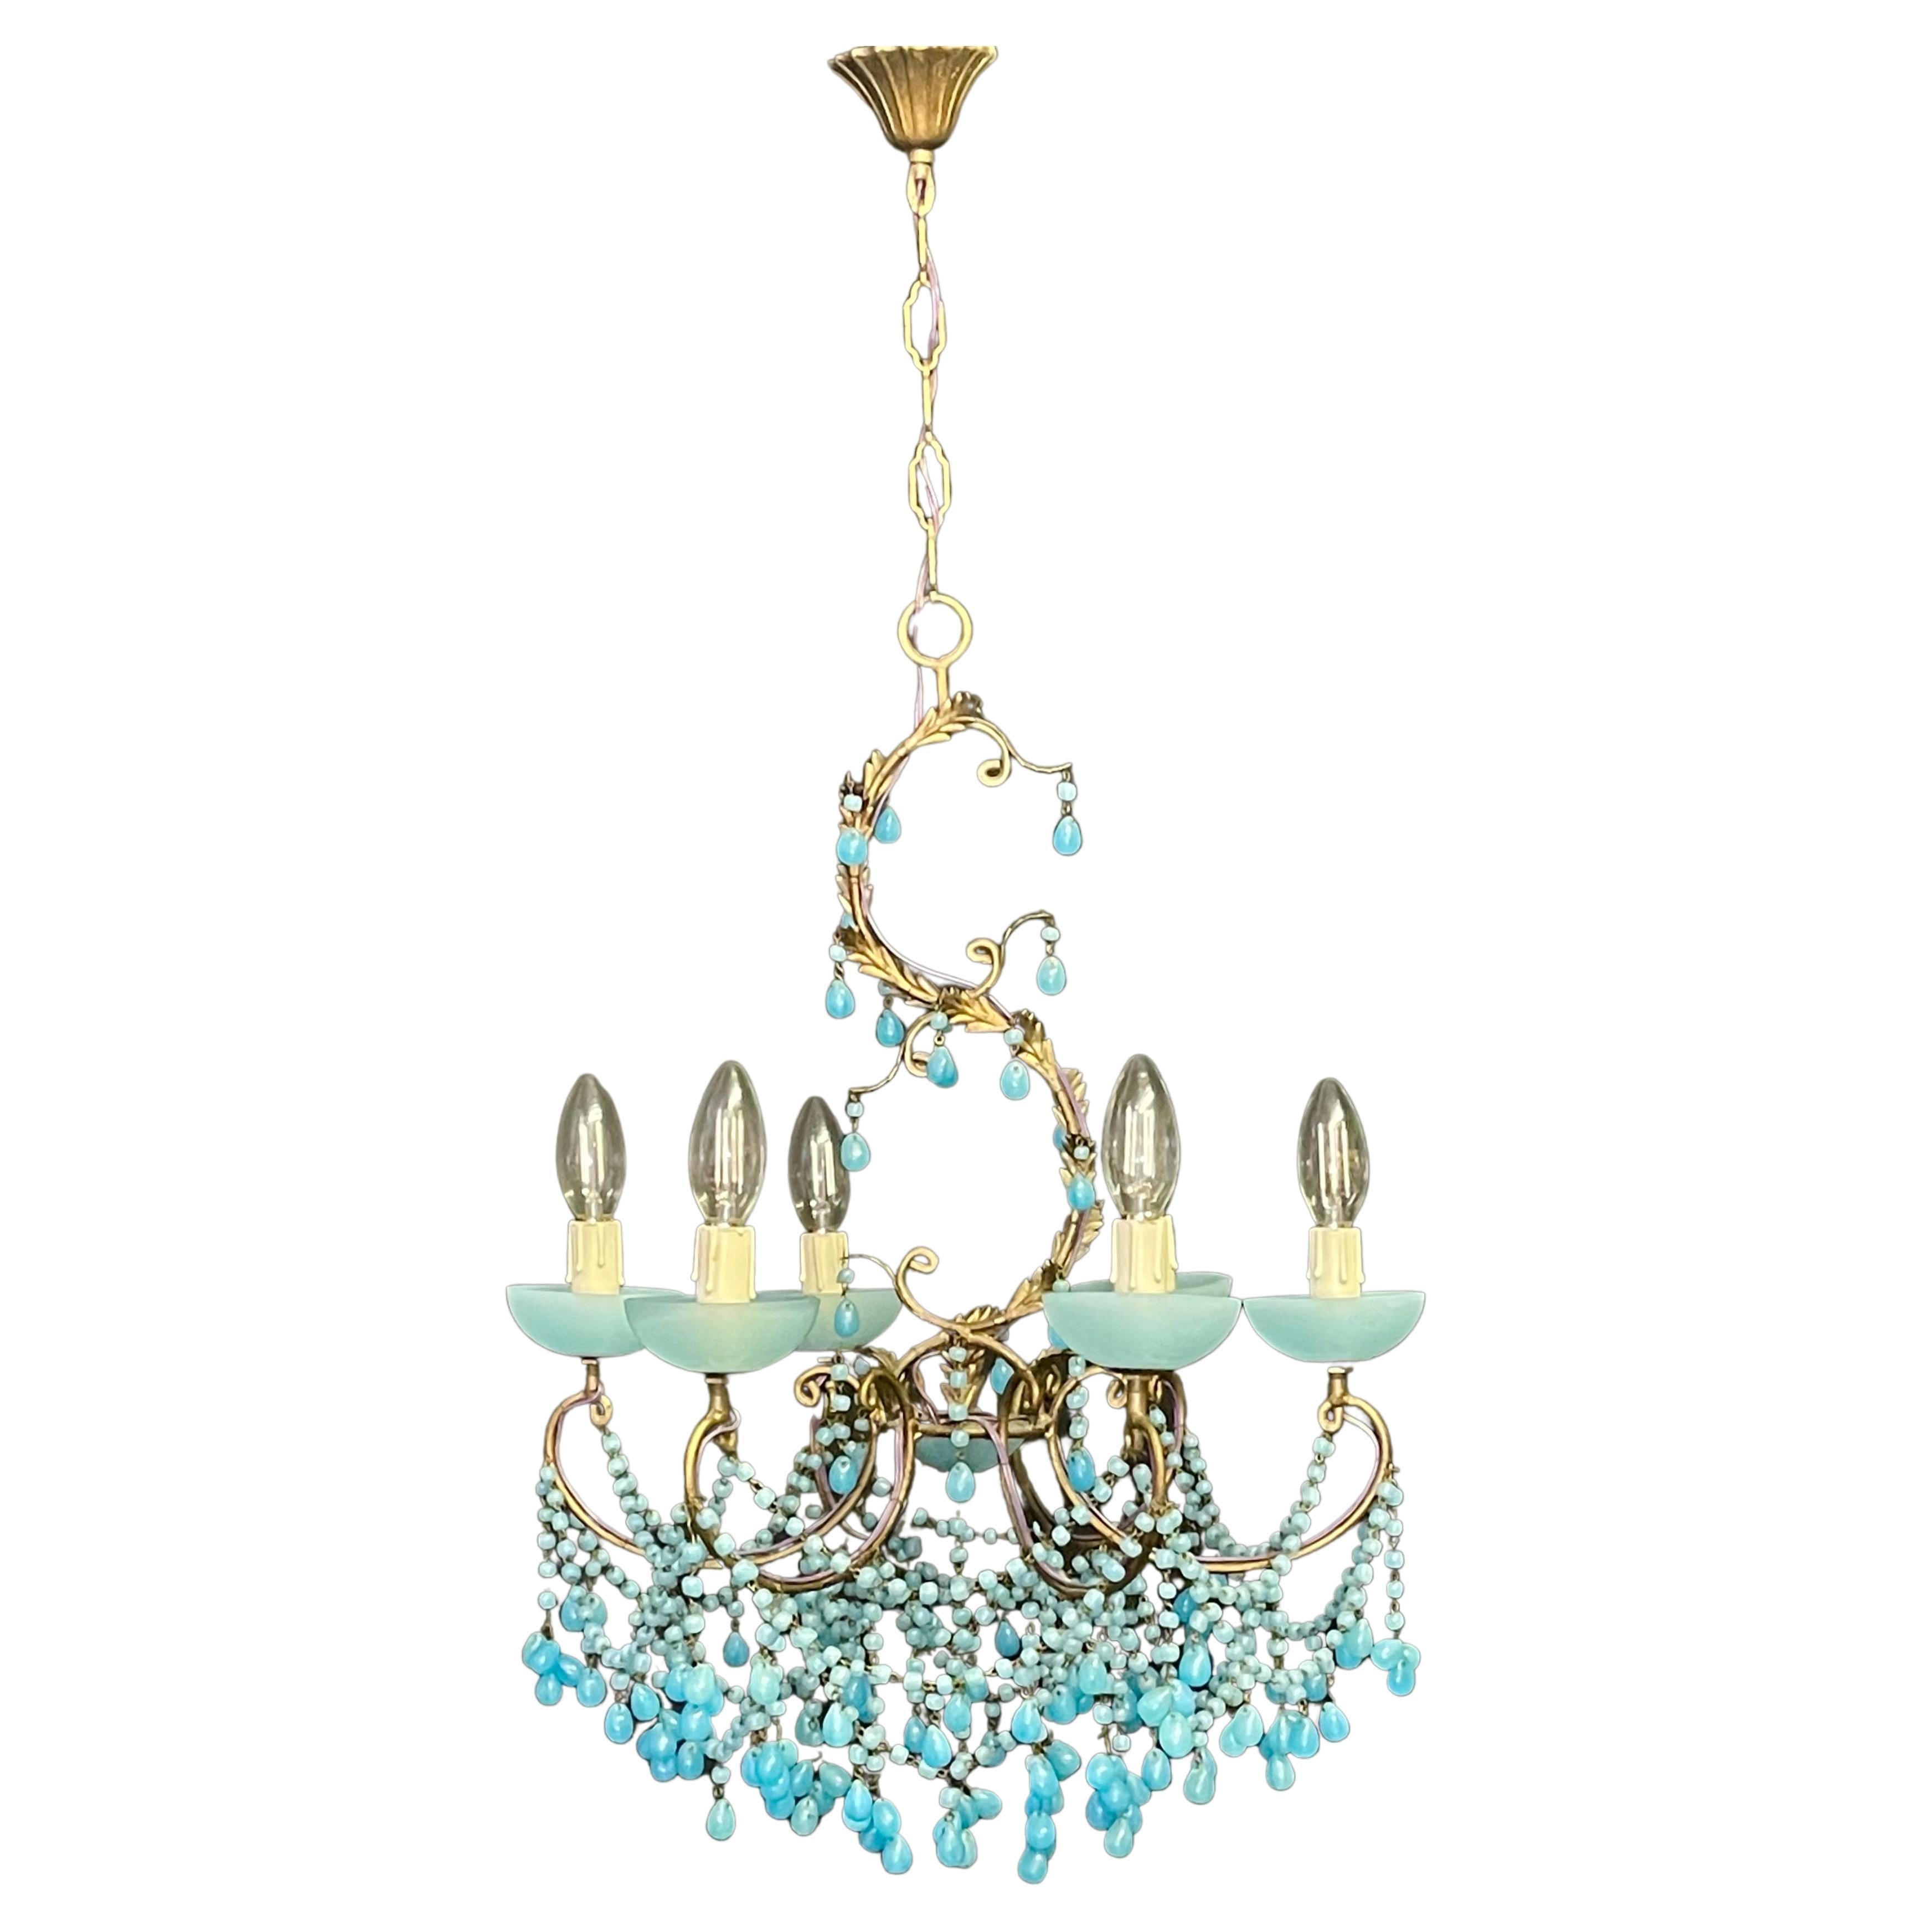 A wonderful aqua opaline blue chandelier, Italy, circa 1930s.
This beautiful handcrafted chandelier is made of patinated metal/iron decorated with aqua opaline blue Murano glass drops.
Socket: e 14 for standard screw bulbs.



